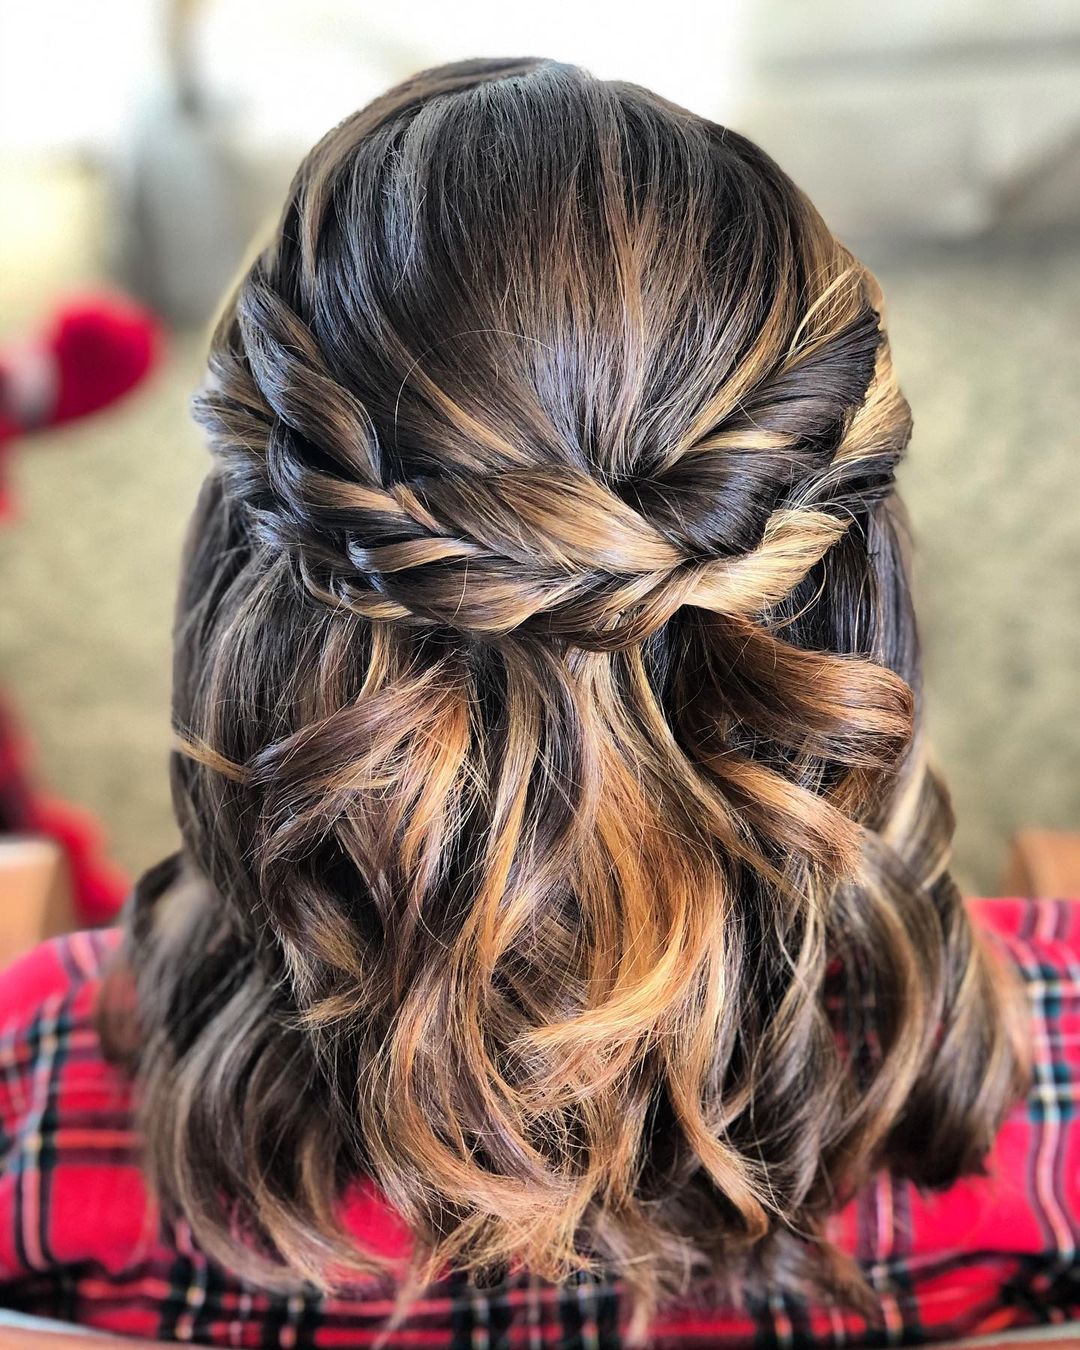 15 Braided Prom Hairstyles for A Princess Look | Hairdo Hairstyle